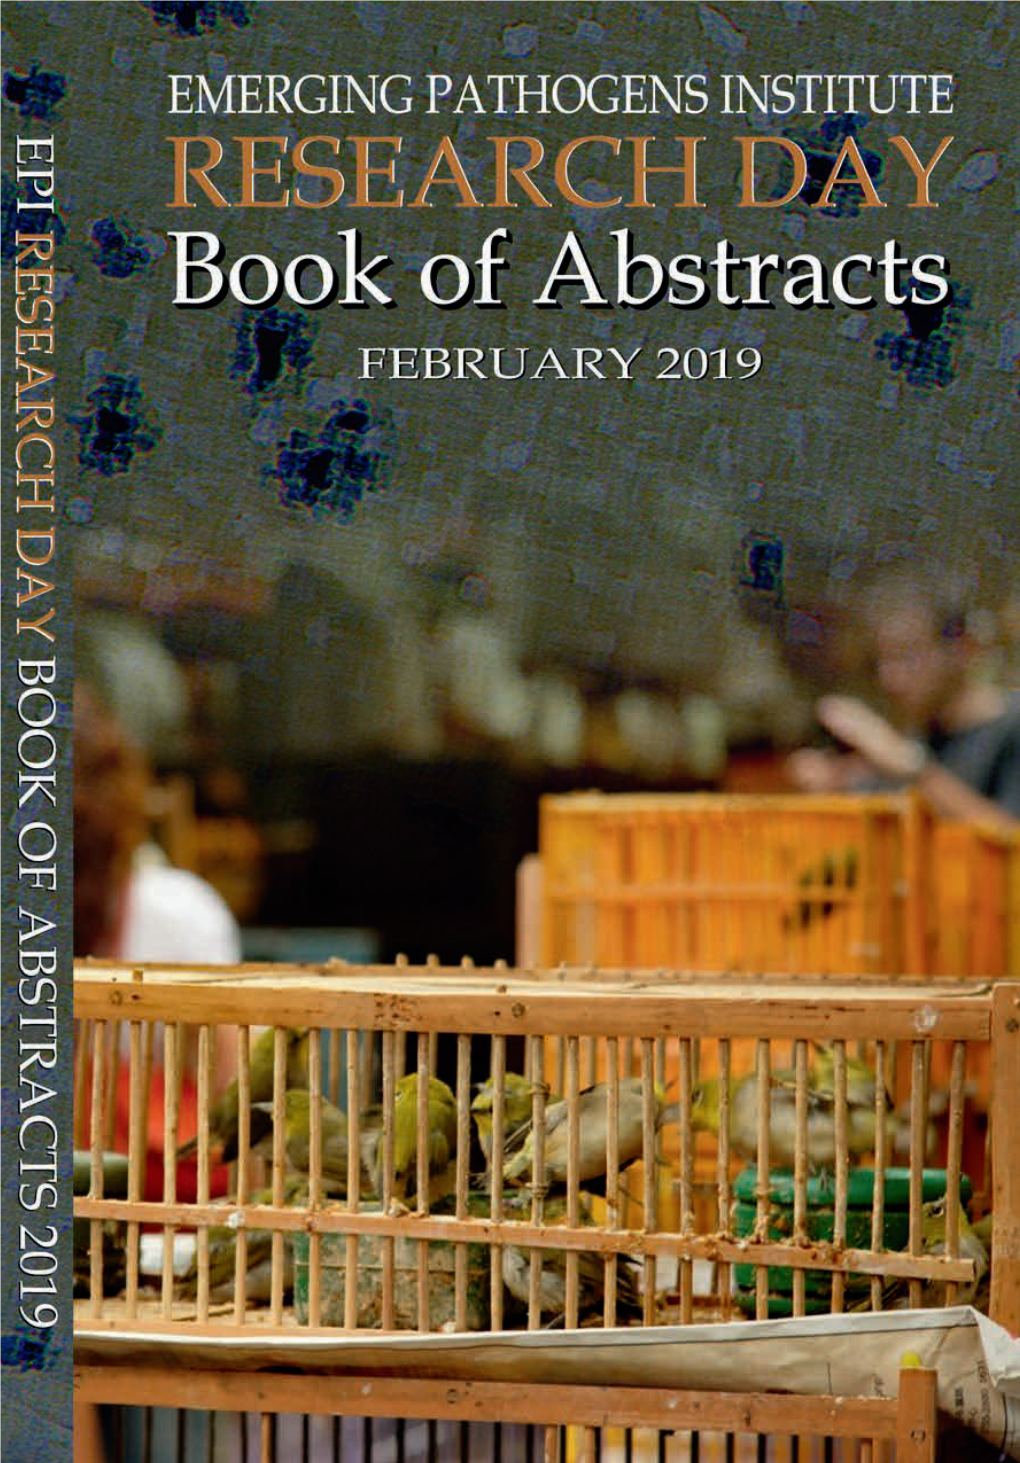 2019 Abstract Booklet